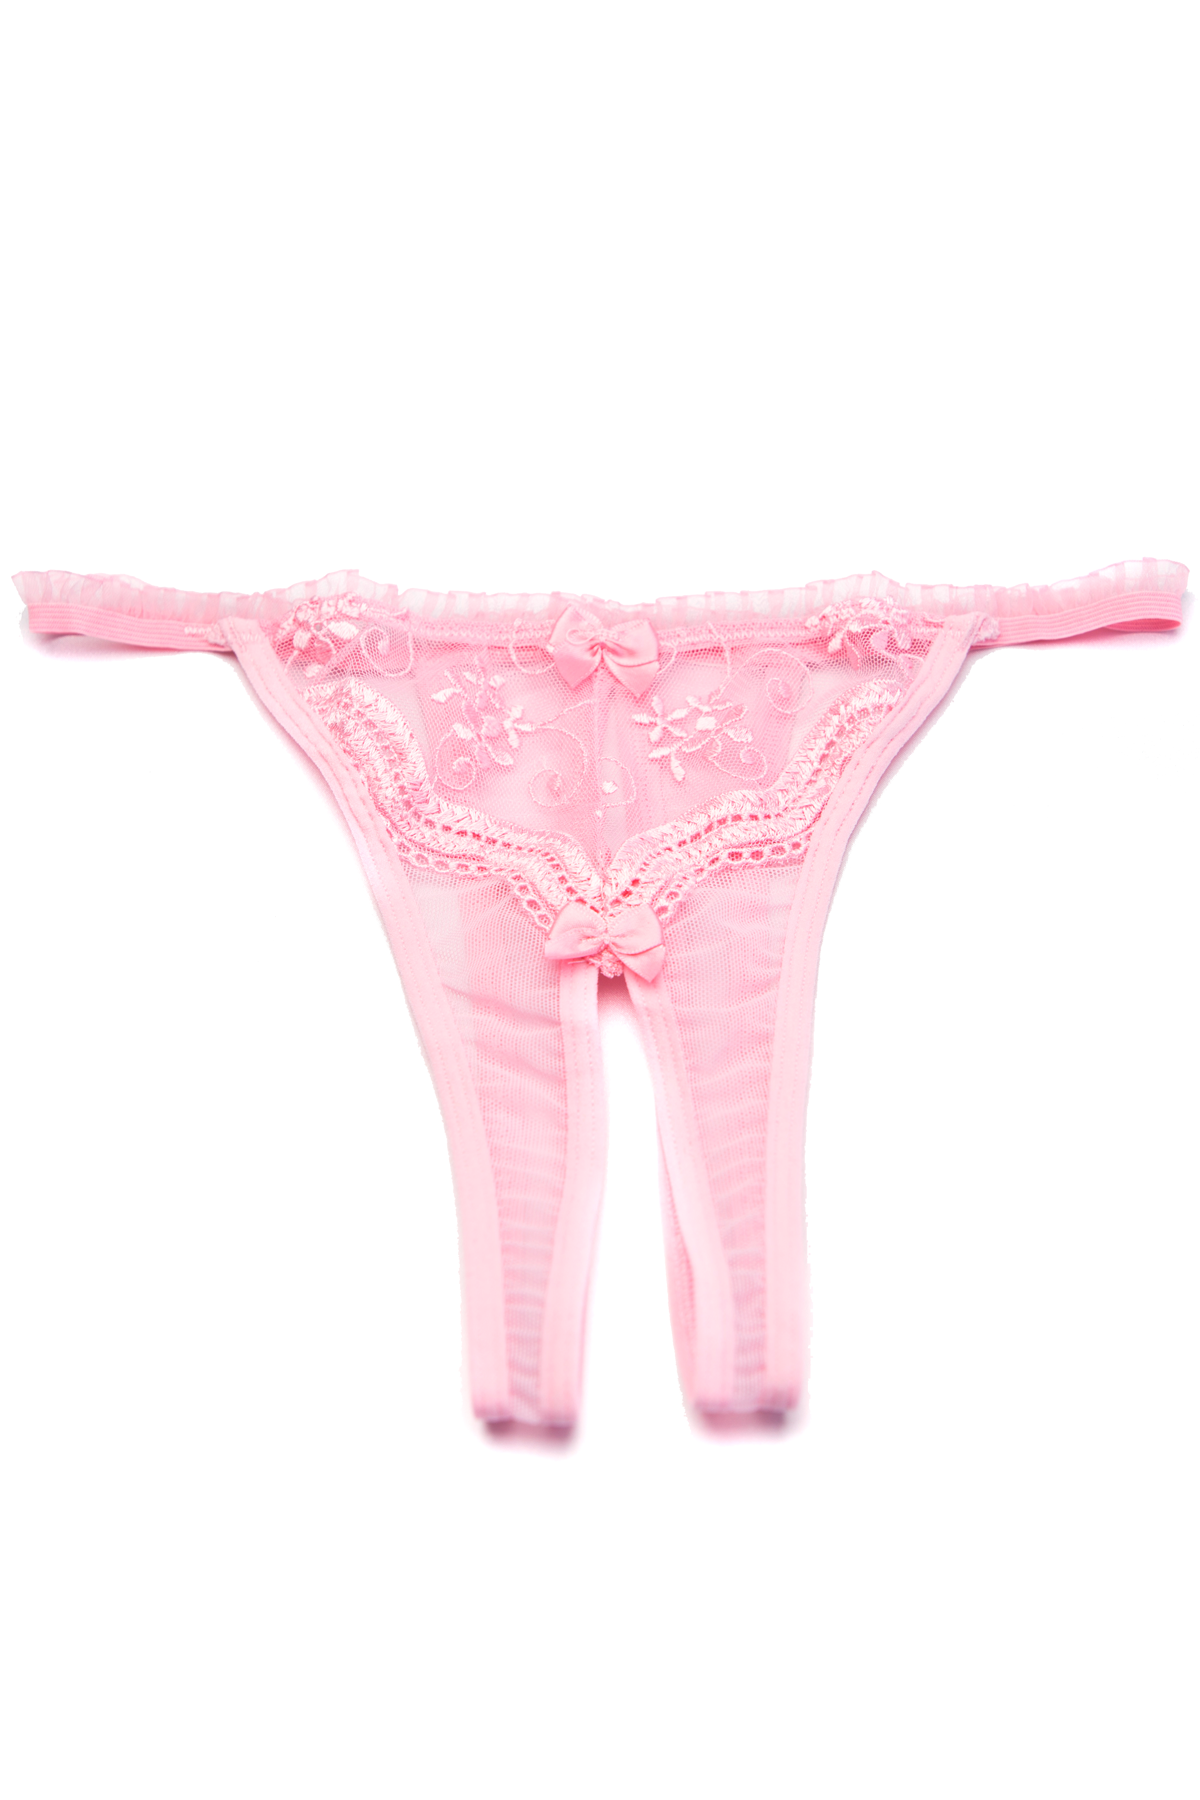 Scalloped Embroidery Crotchless Thong